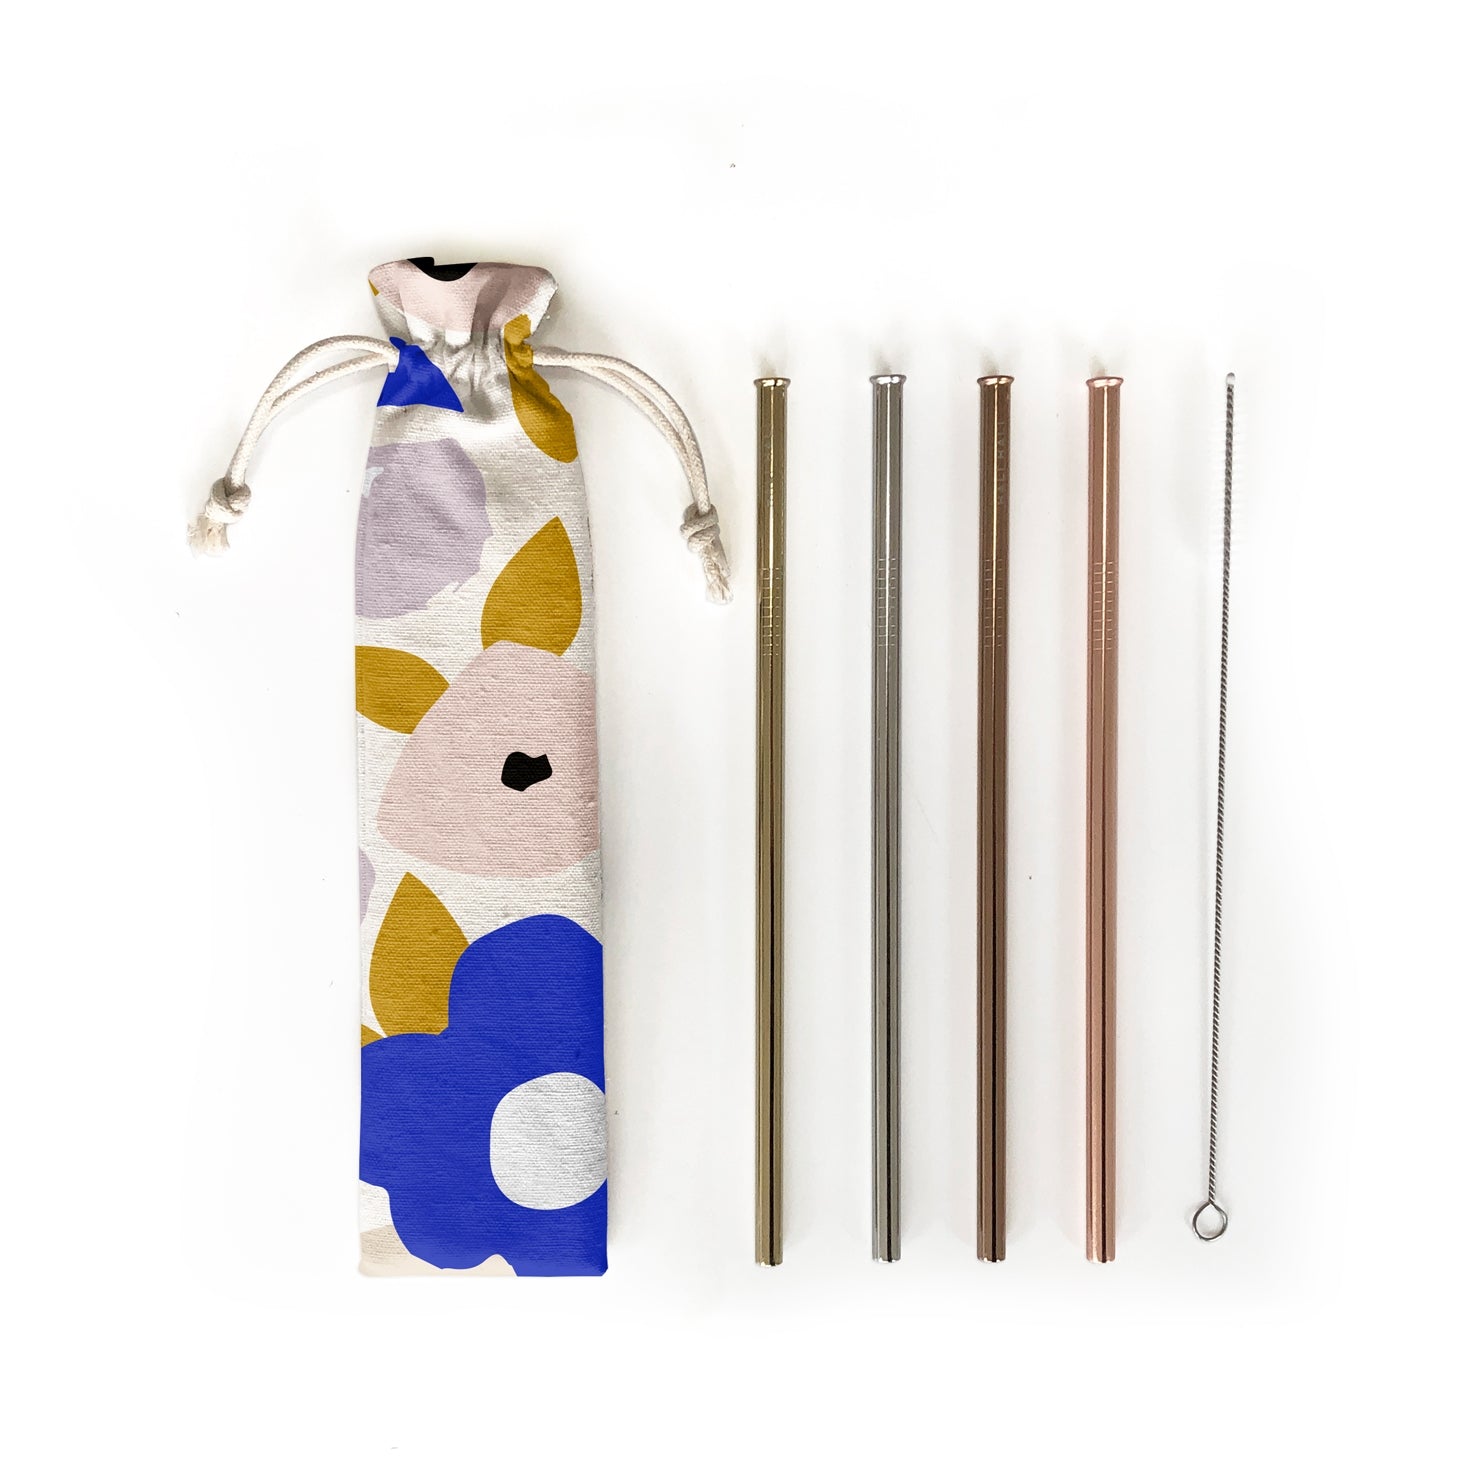 Reusable Stainless Steel Straw Set - Blossom Print  by Hali Hali